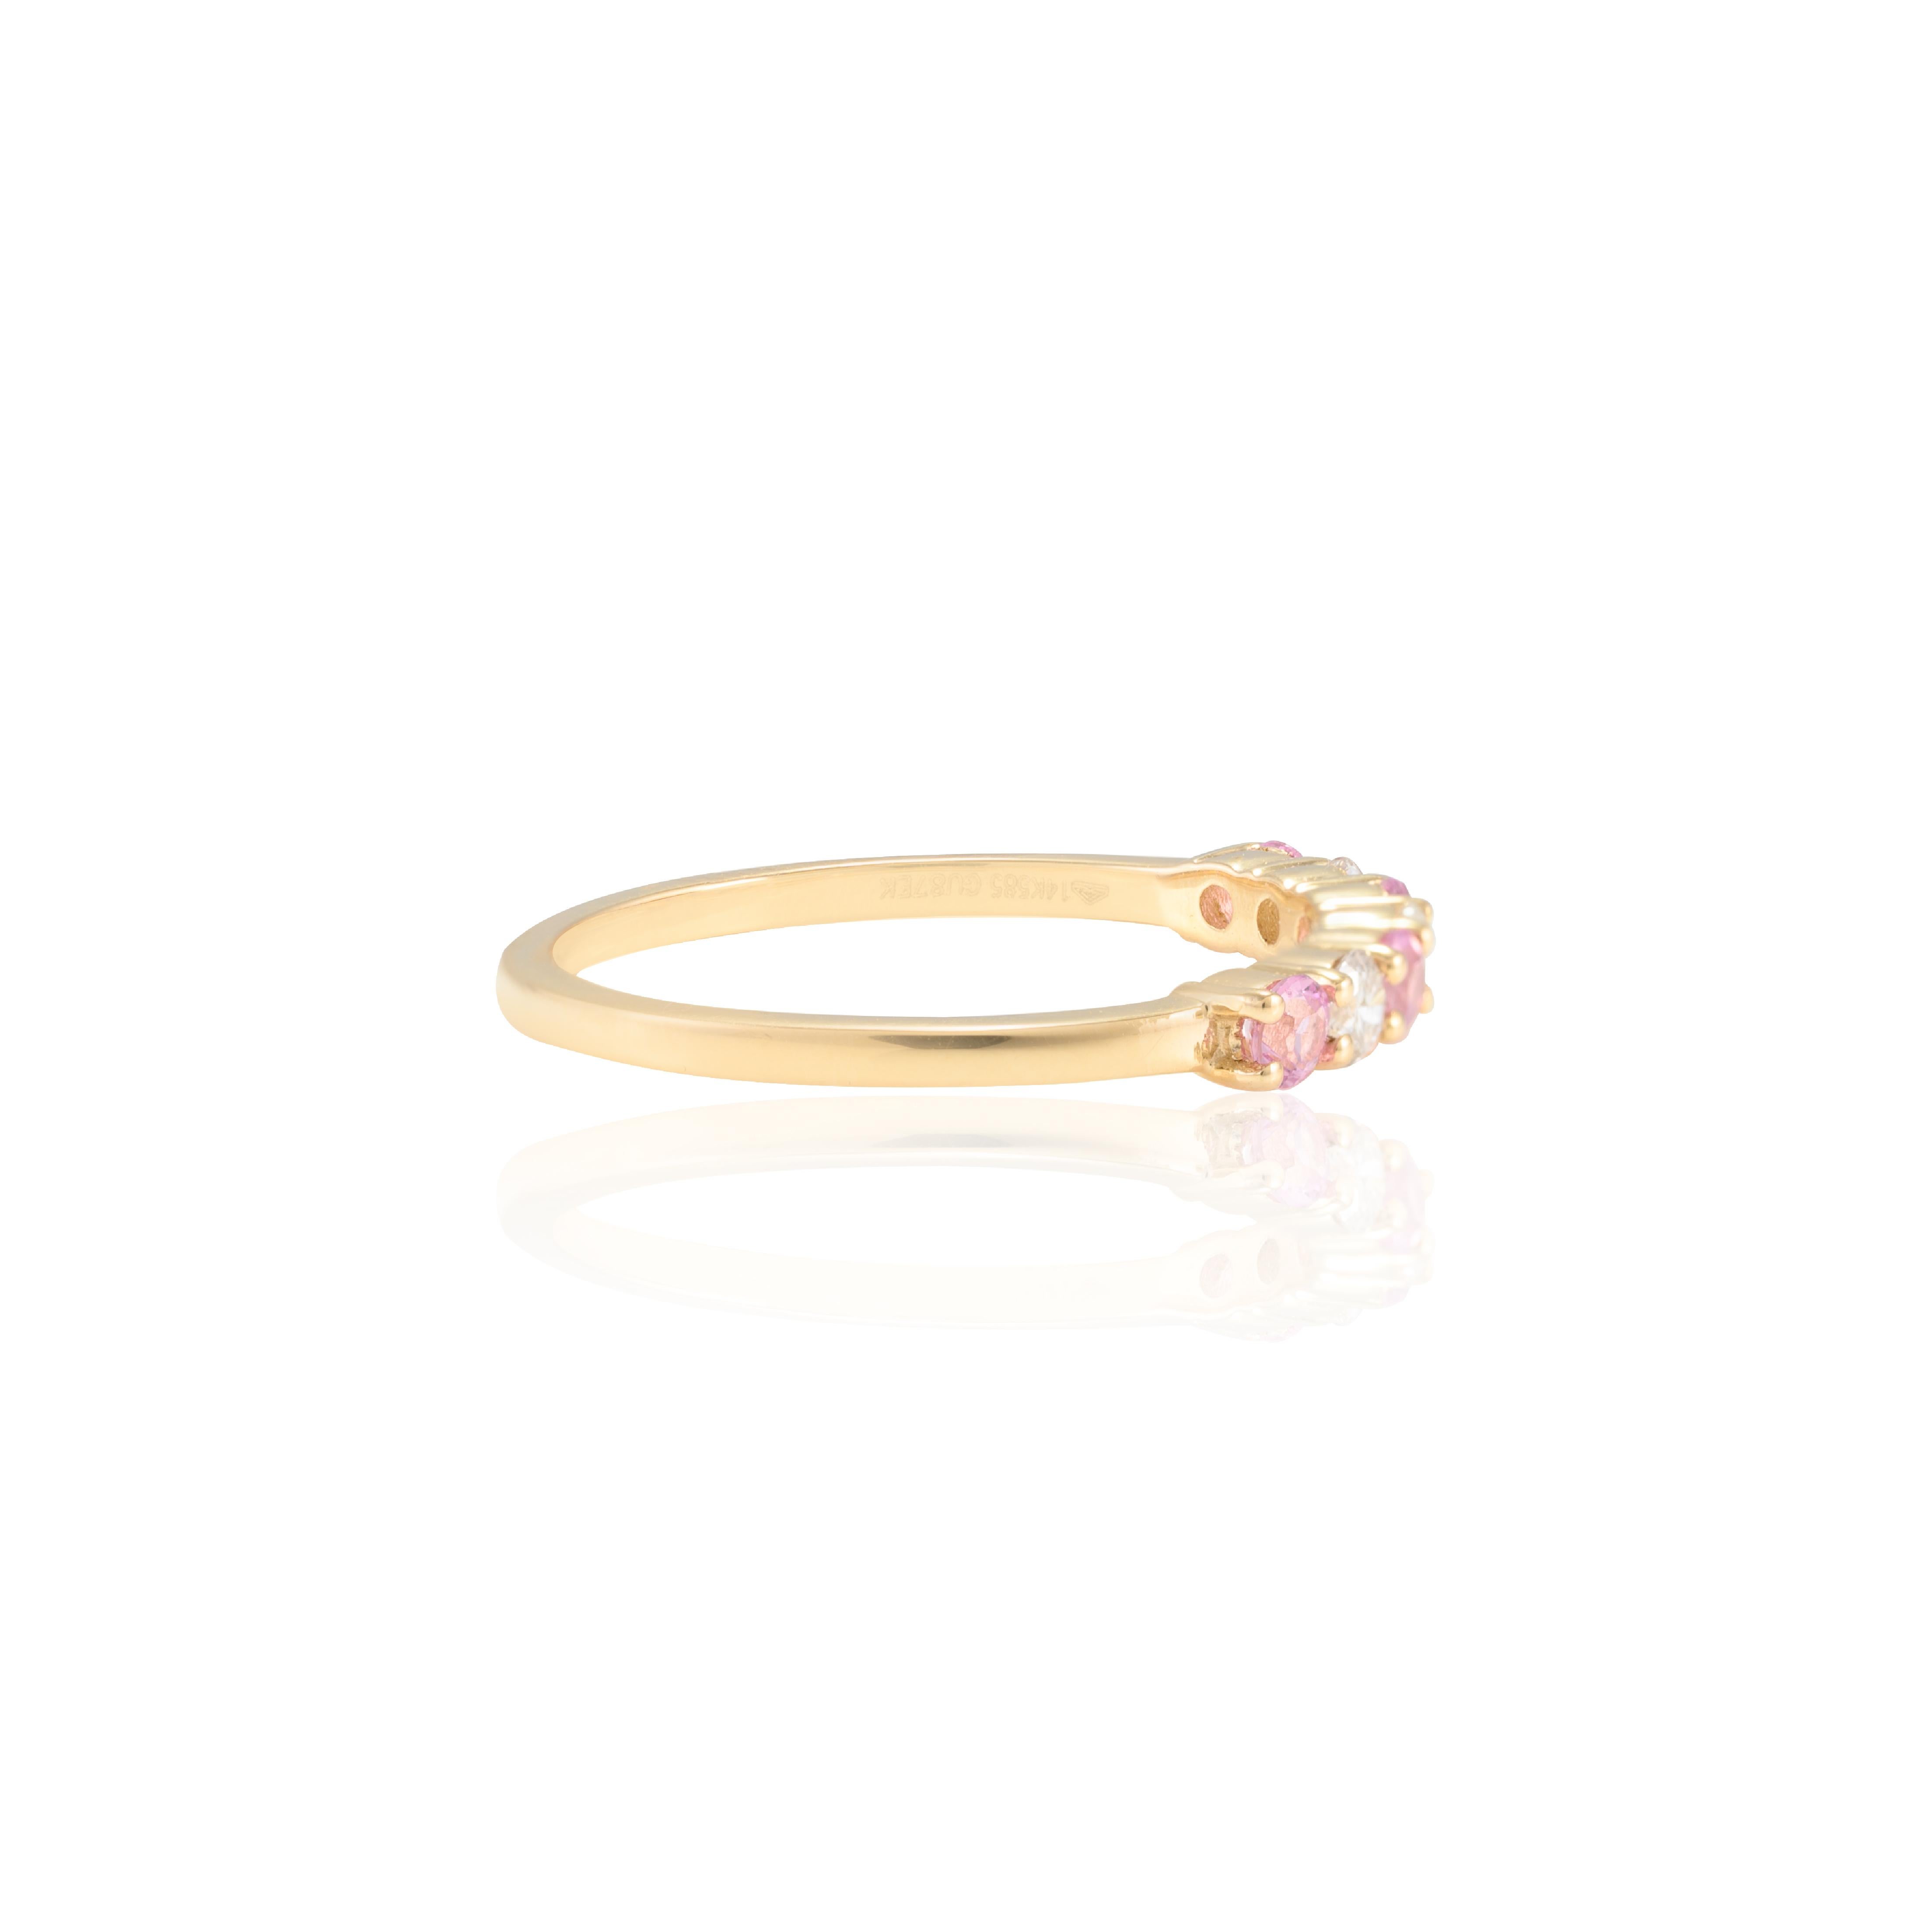 For Sale:  Minimal 0.35 CTW Pink Sapphire and Diamond Stackable Band 14k Solid Yellow Gold 2